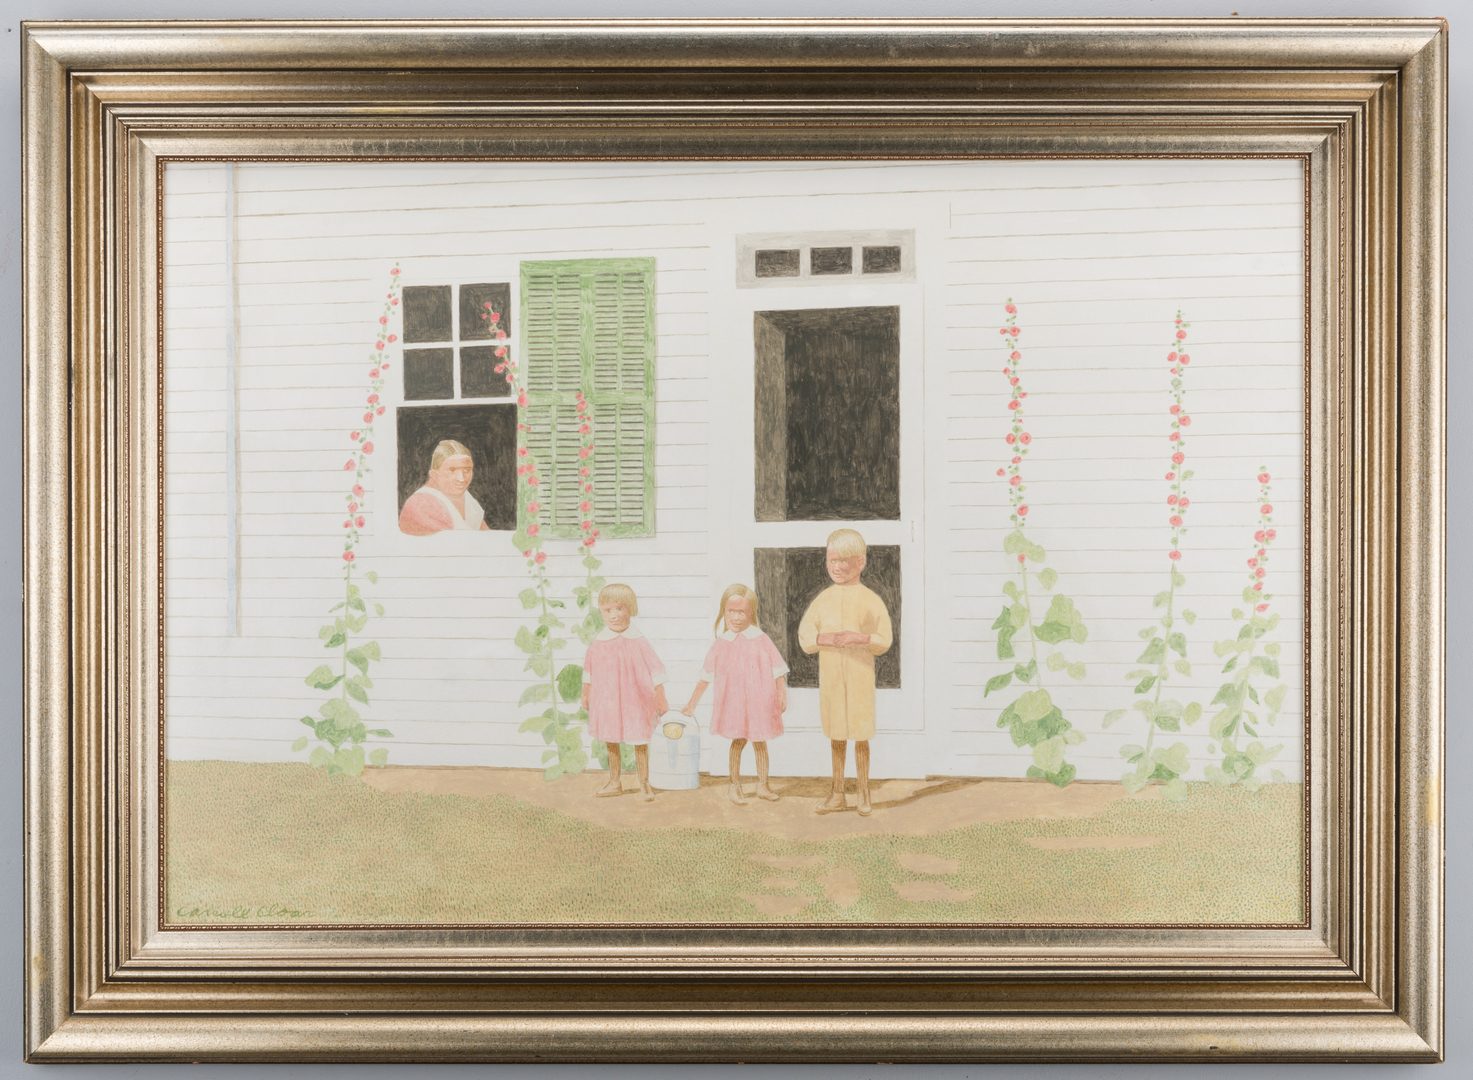 Lot 181: Carroll Cloar painting, The Watering Detail